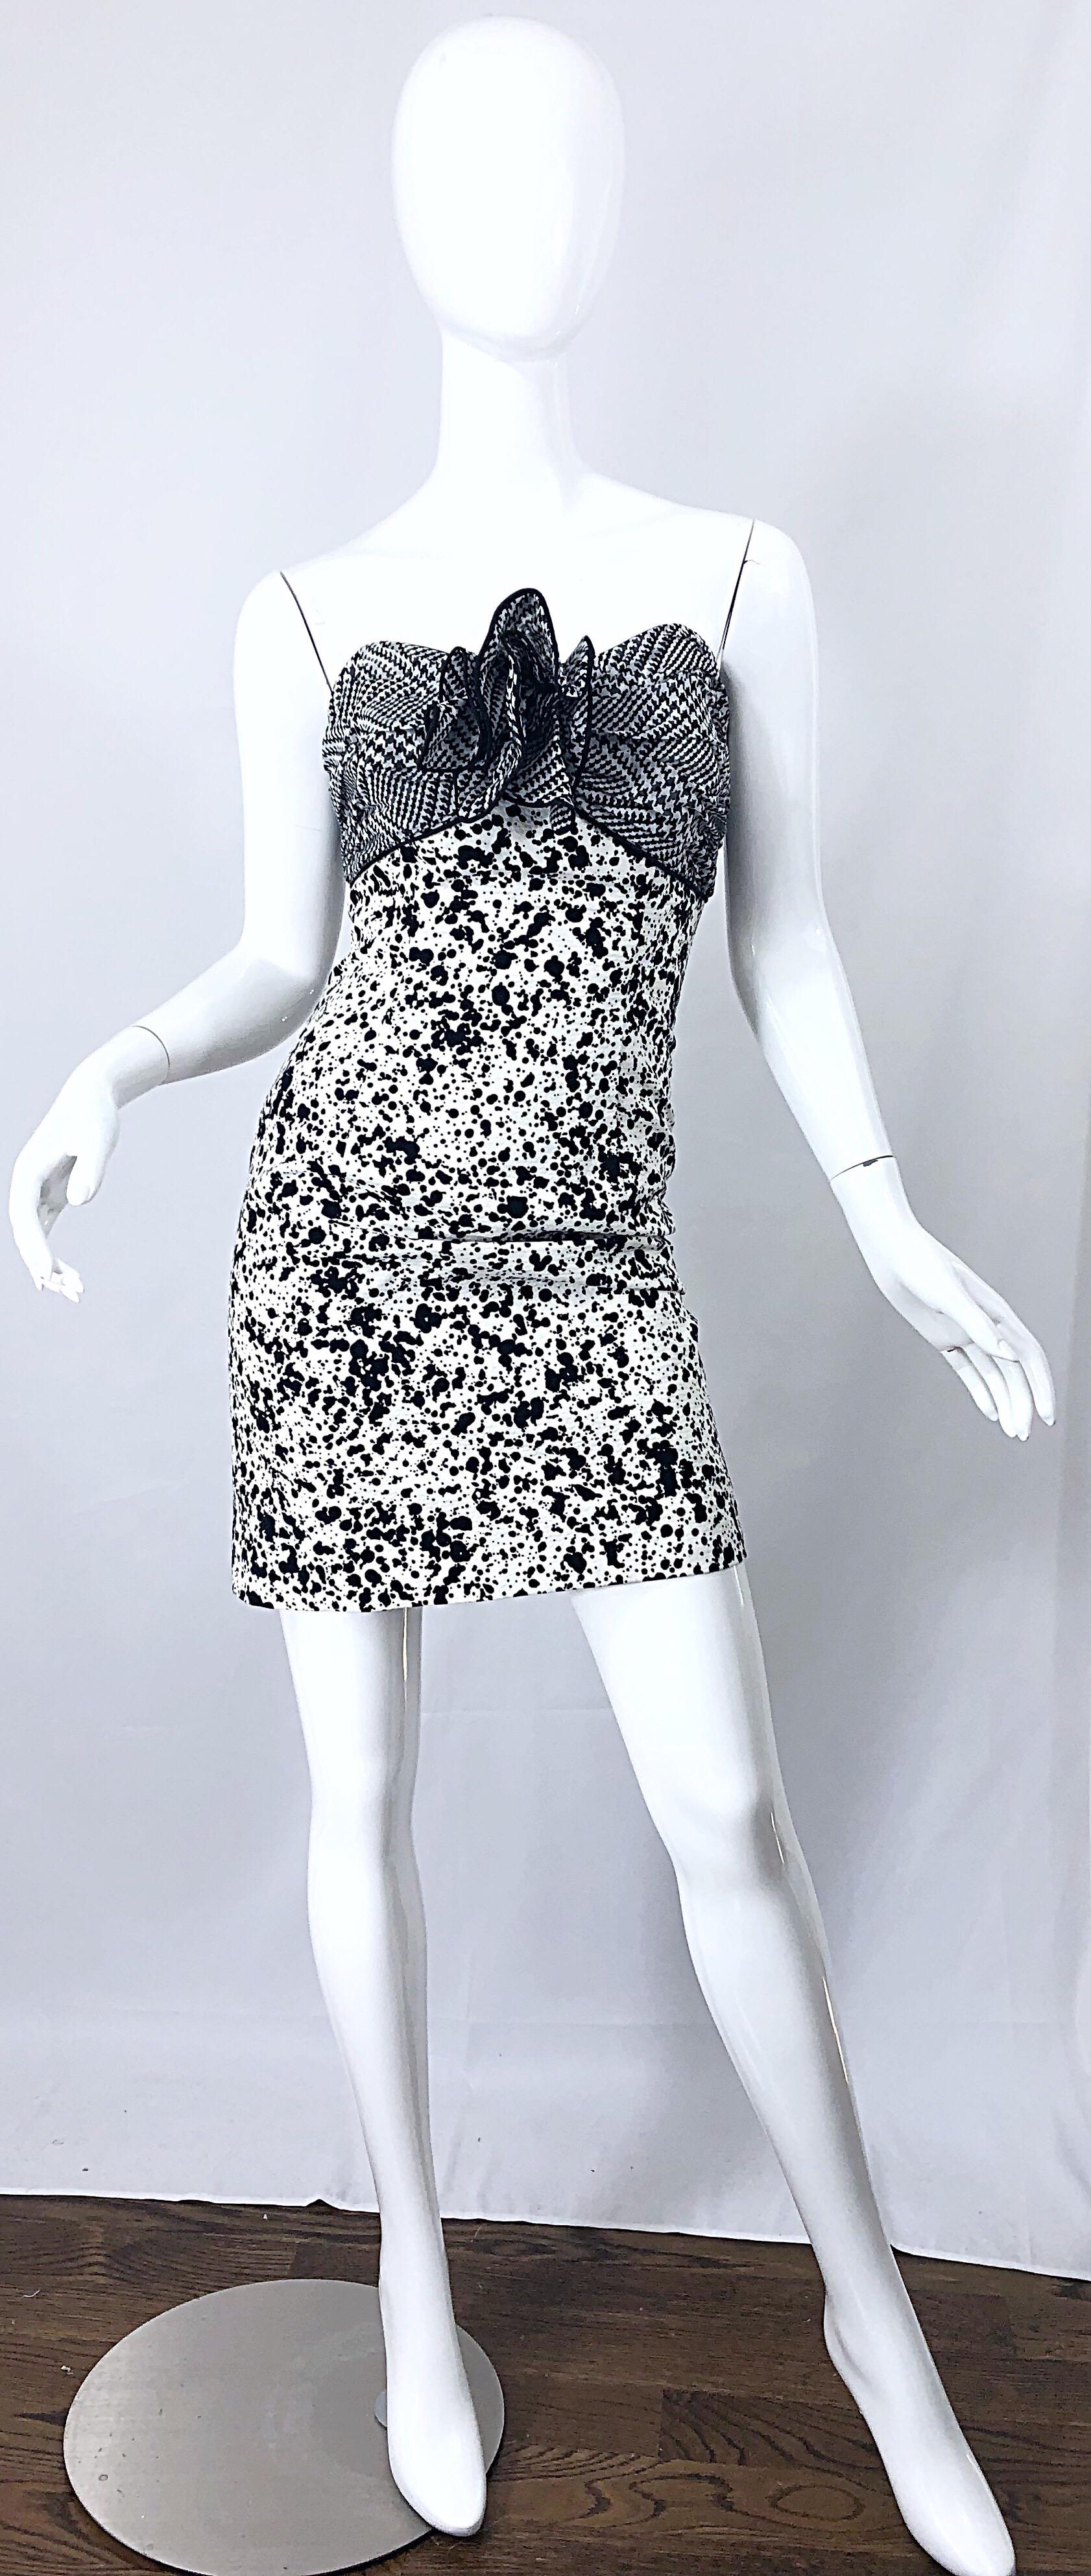 Stylish late 80s  PATRICIA RHODES for I MAGNIN black and white strapless cocktail mini dress! Features a black and white houndstooth silk chiffon bodice. Large chiffon flower appliqué at center bust is so SJP in, 